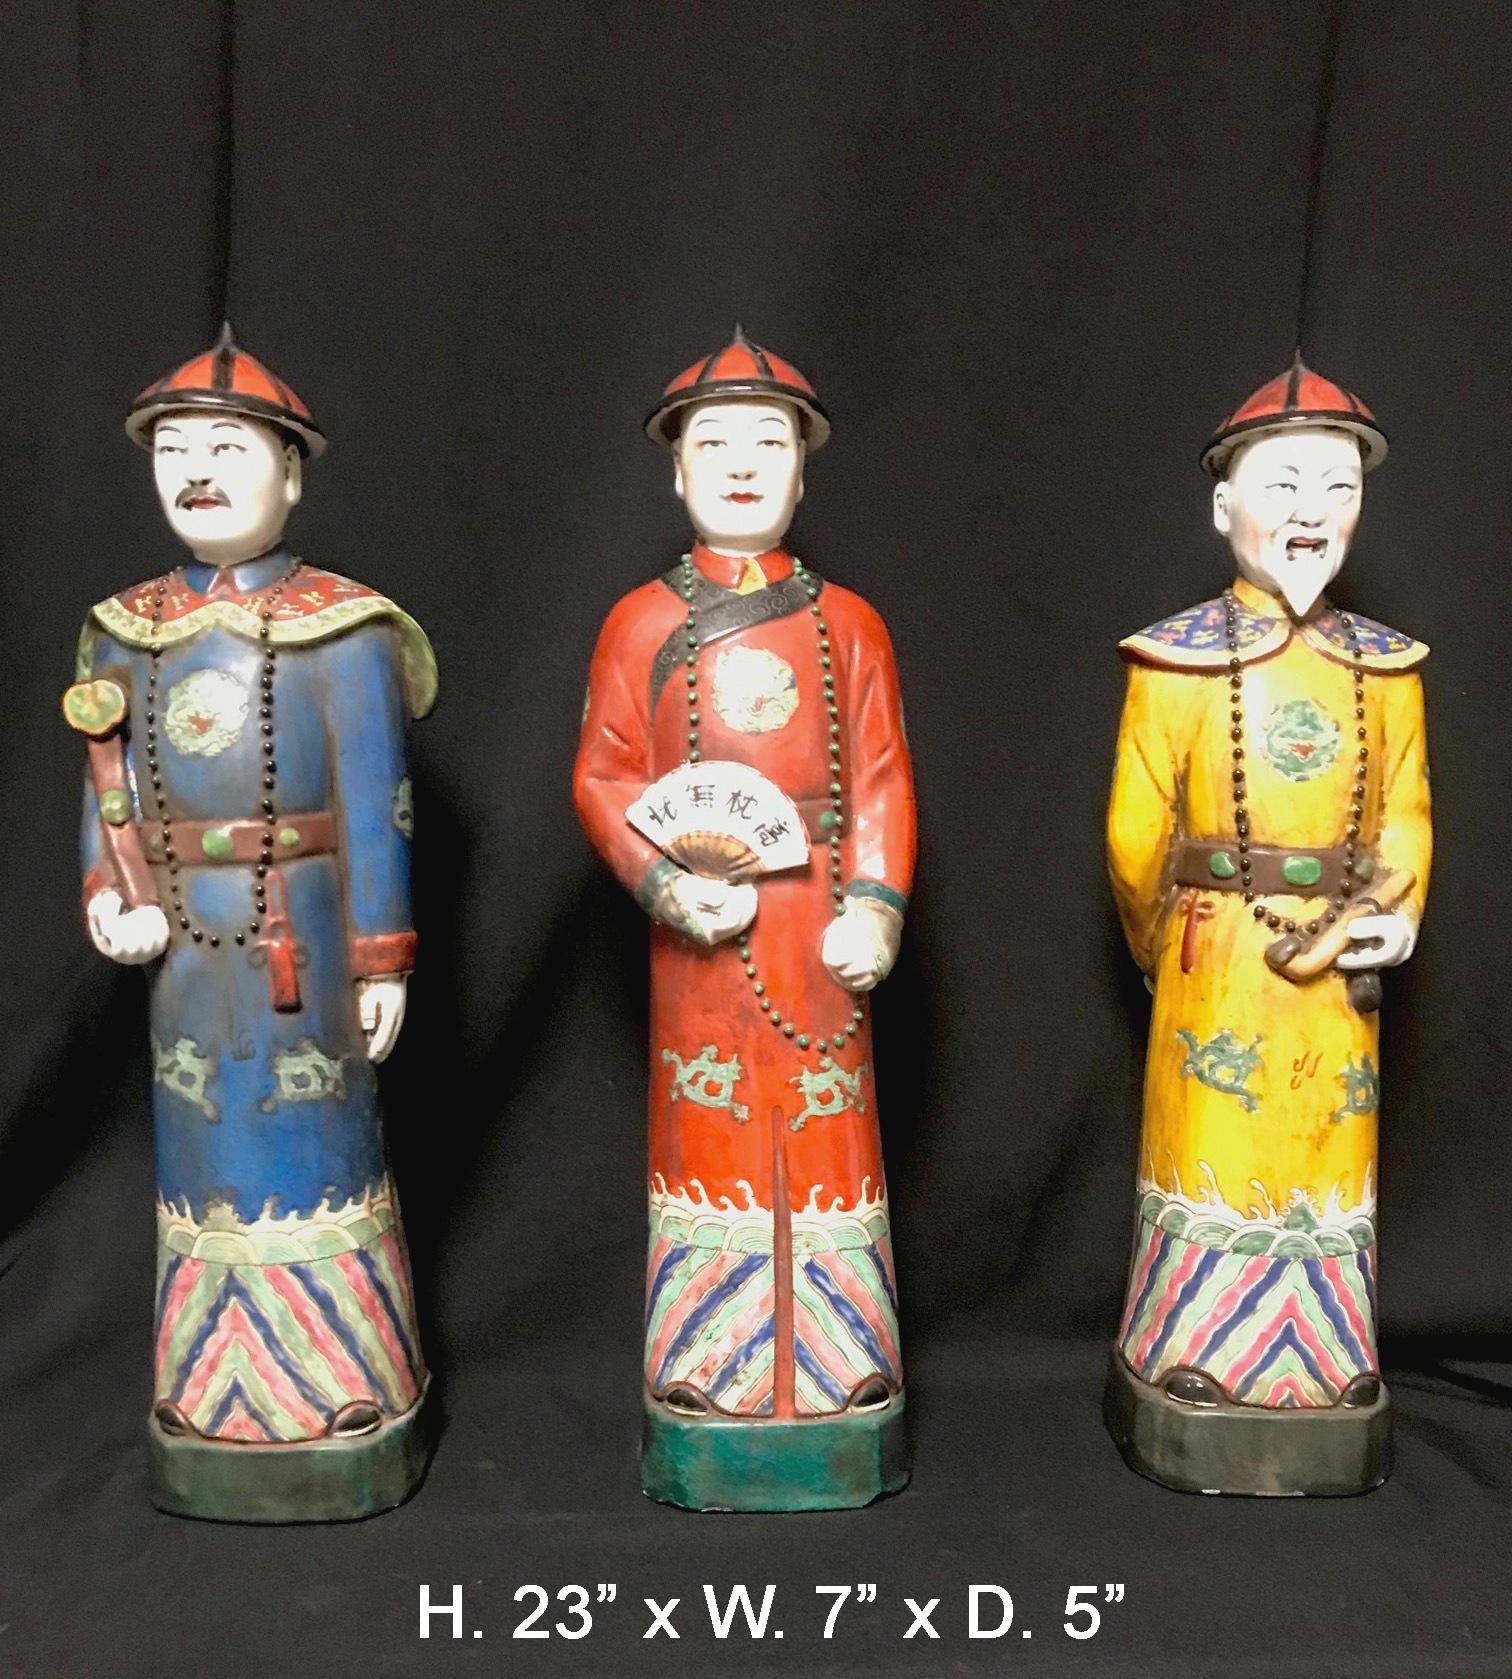 Attractive set of three Chinese hand painted porcelain figures of the three Immortals and dressed in traditional garments and hats. 
Second half of the 20th century.

Each fully poly-chromed and paint-decorated.